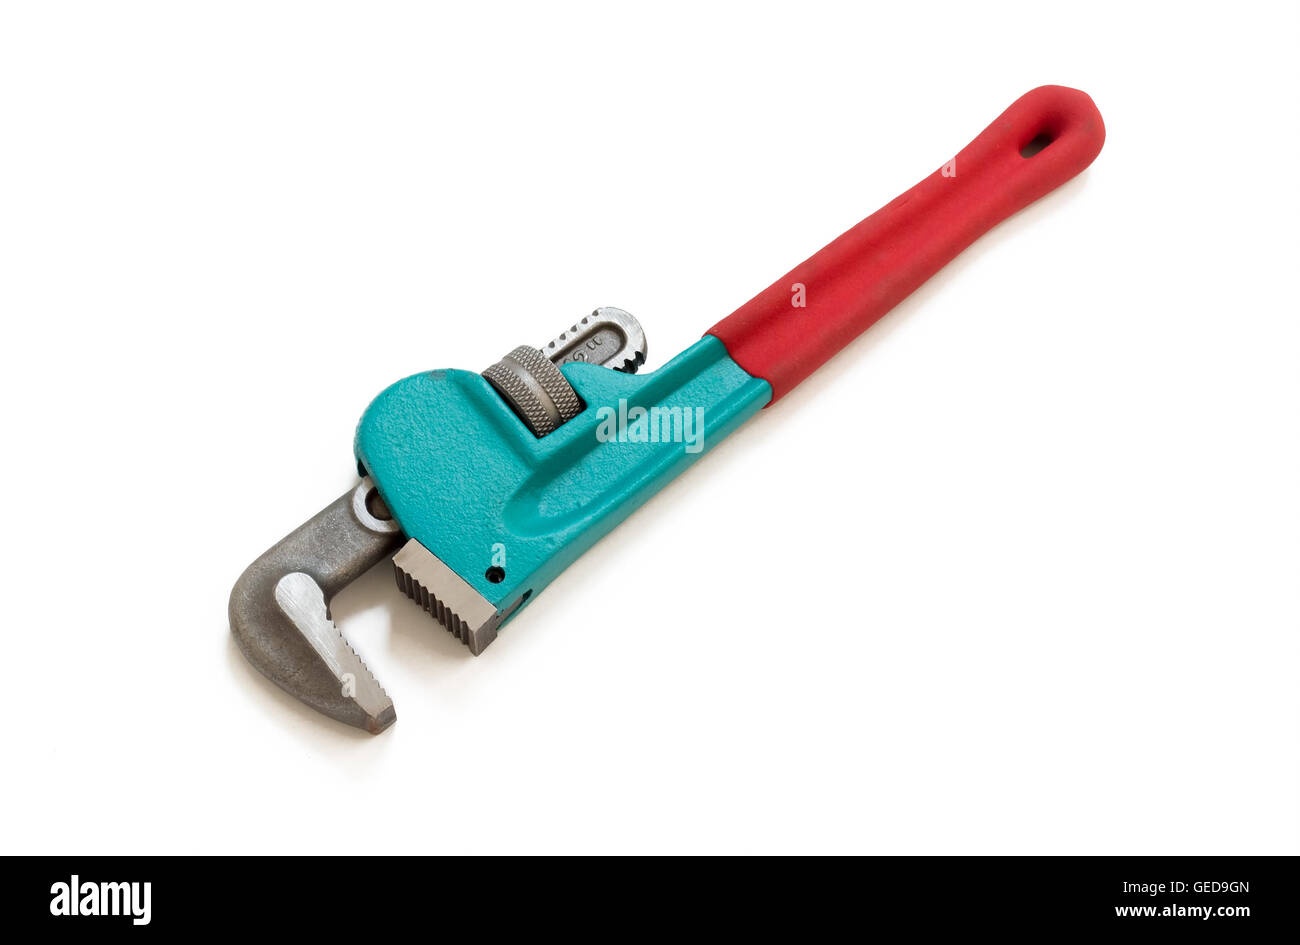 pipe wrench on white background Stock Photo